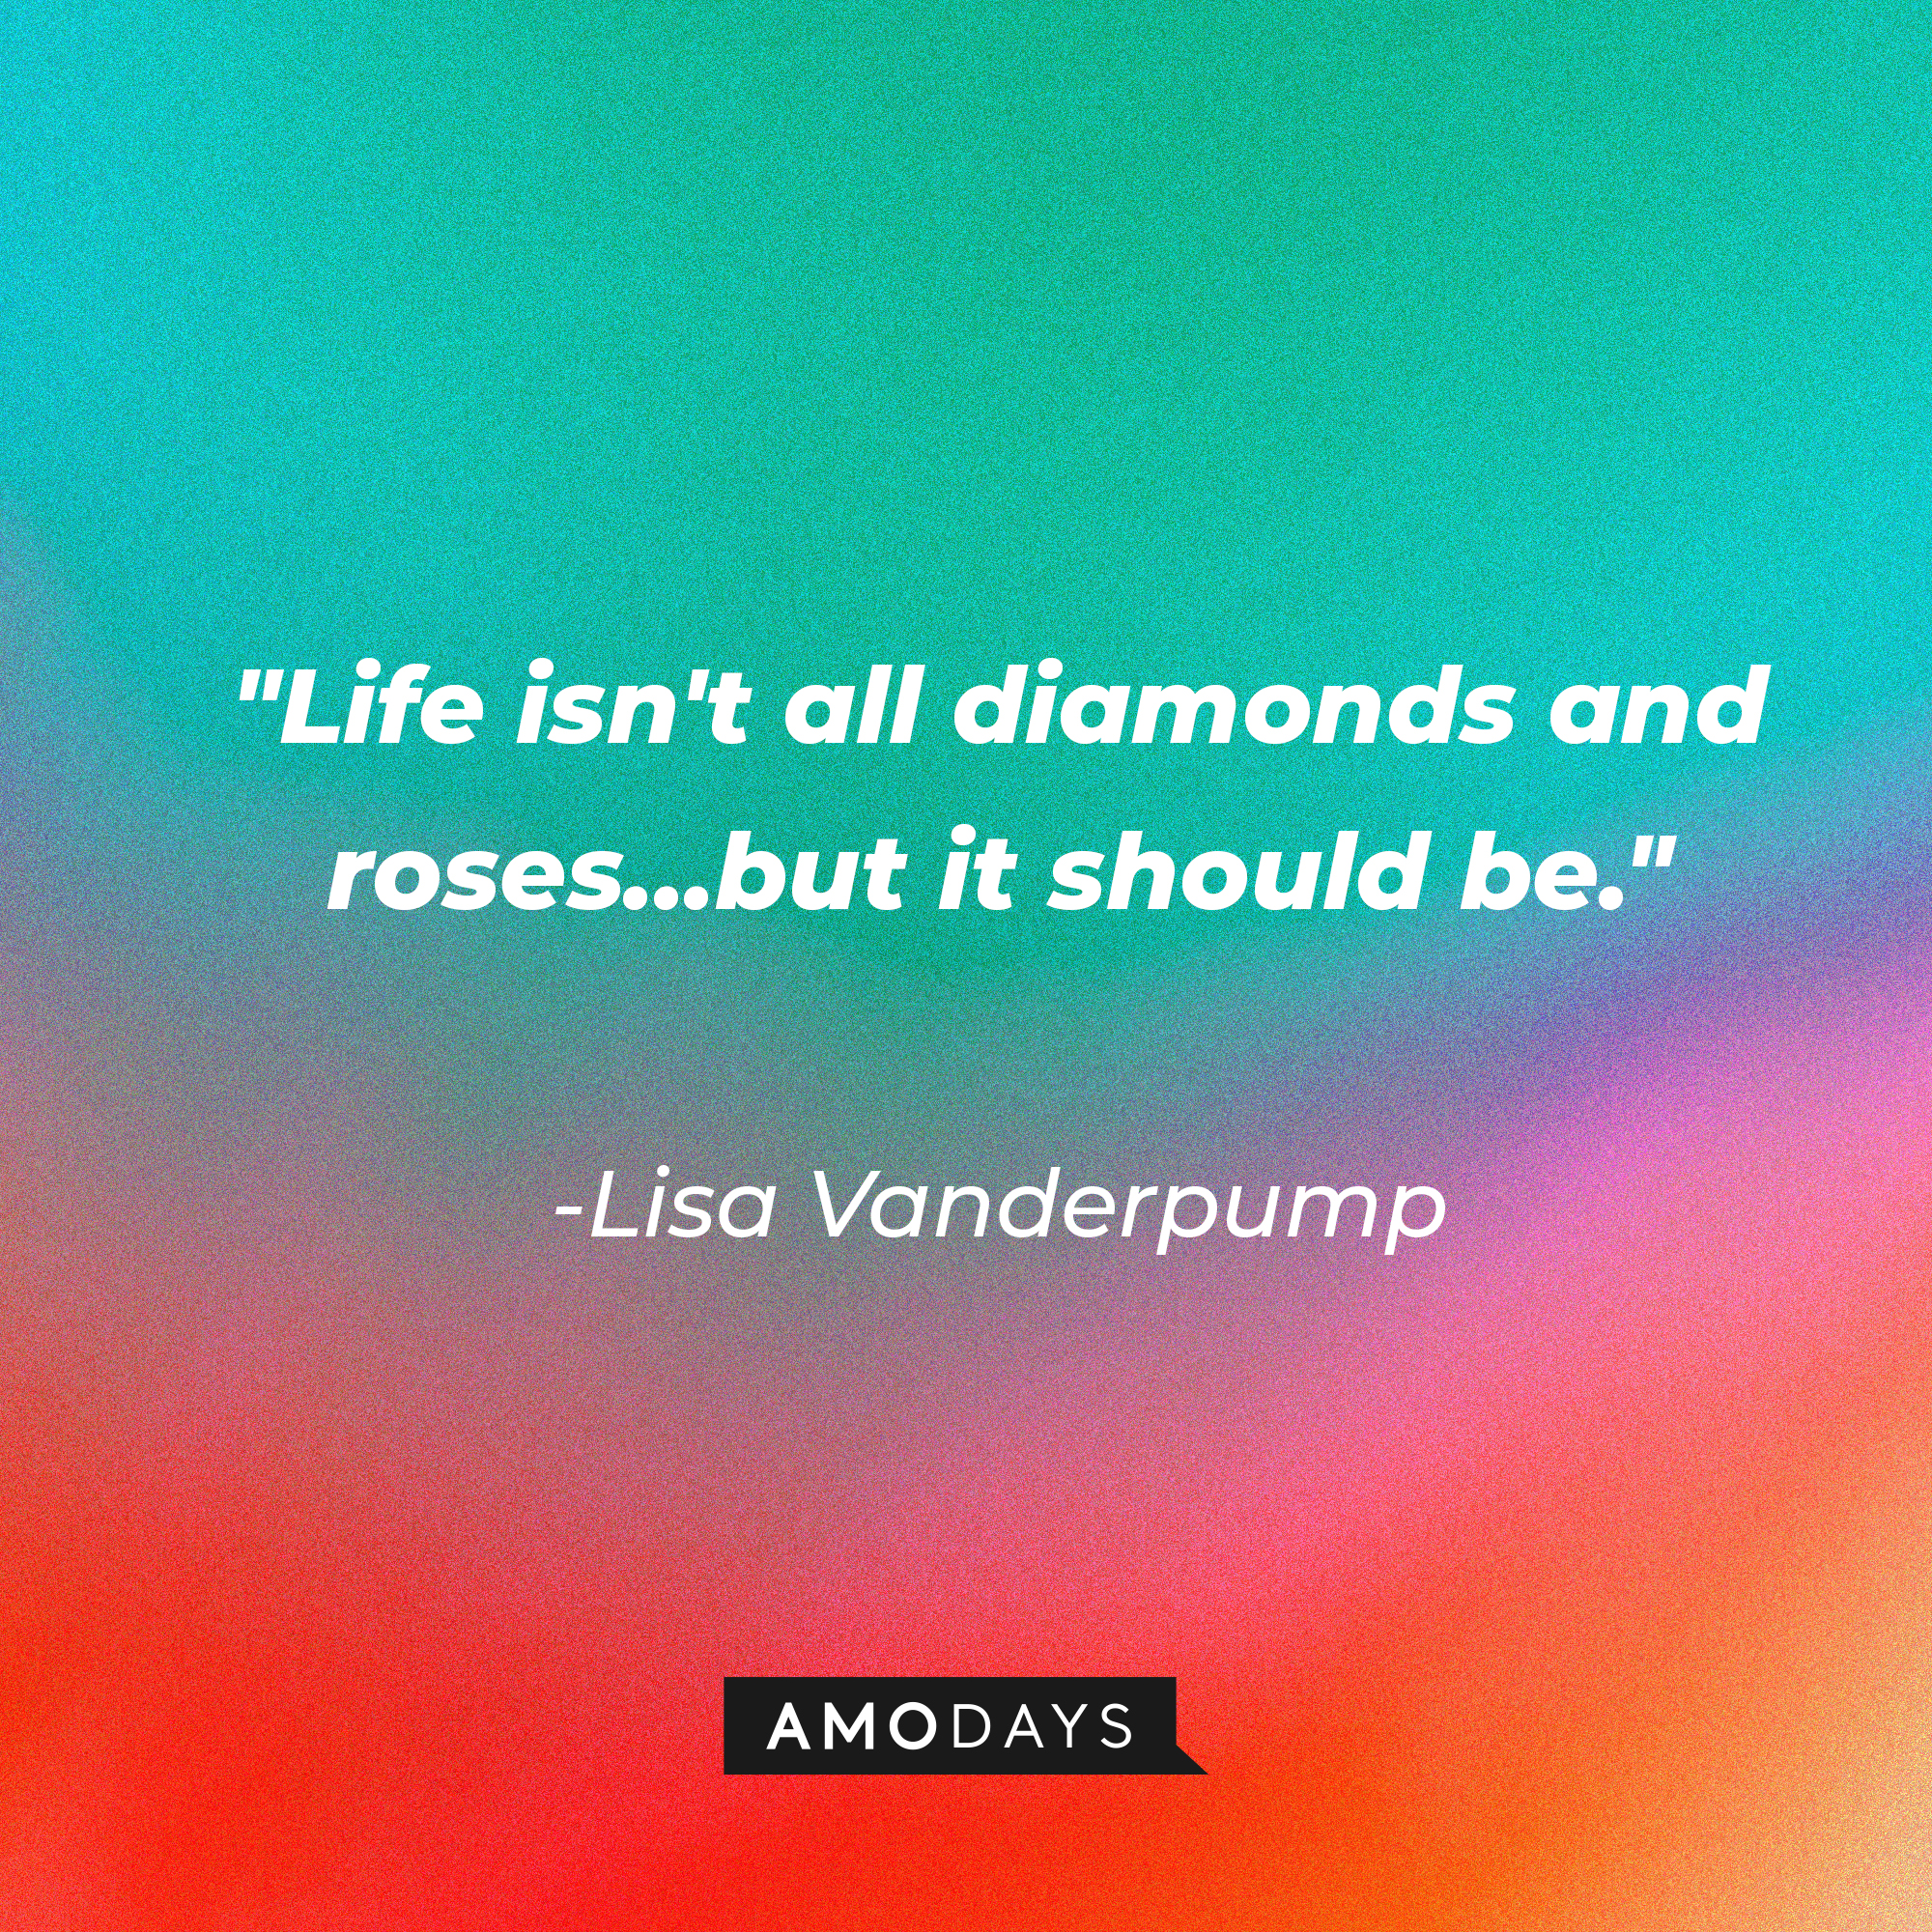 Lisa Vanderpump’s quote: “Life isn't all diamonds and roses…but it should be.”  | Source: AmoDays